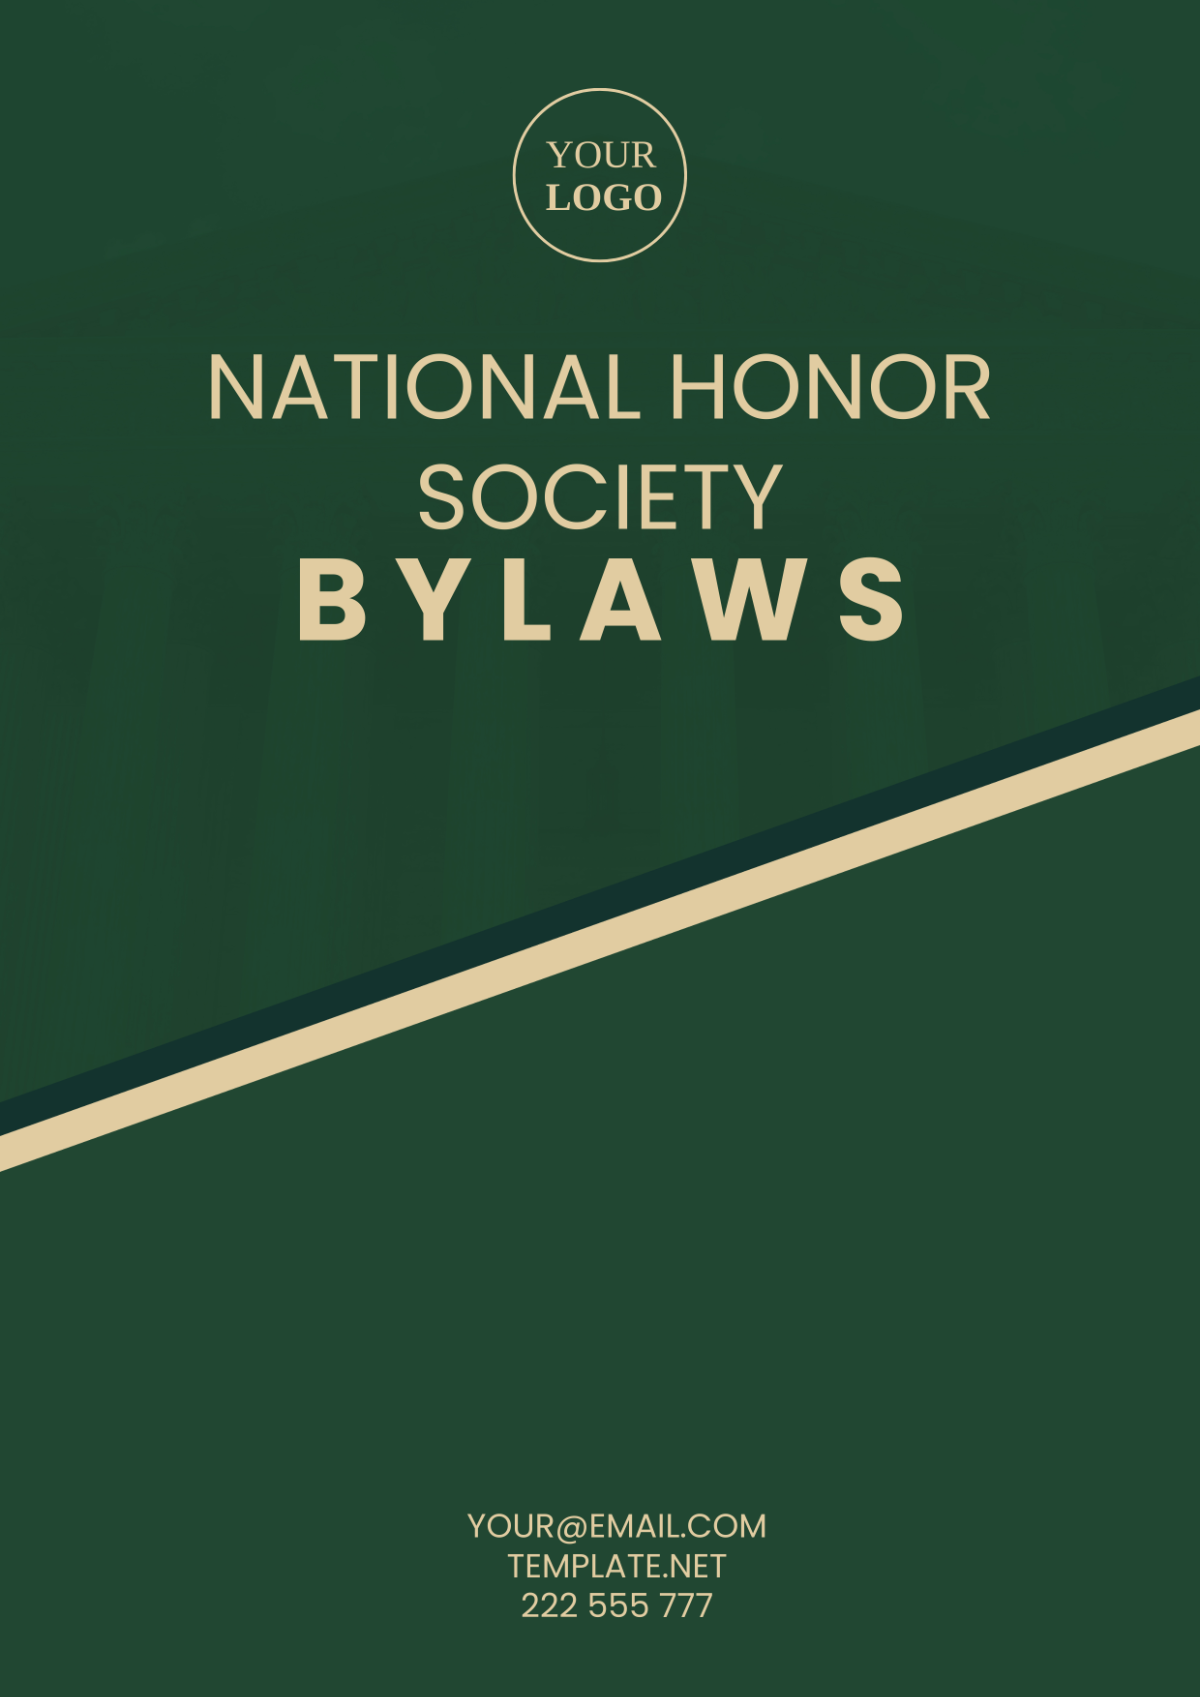 National Honor Society Bylaws Template